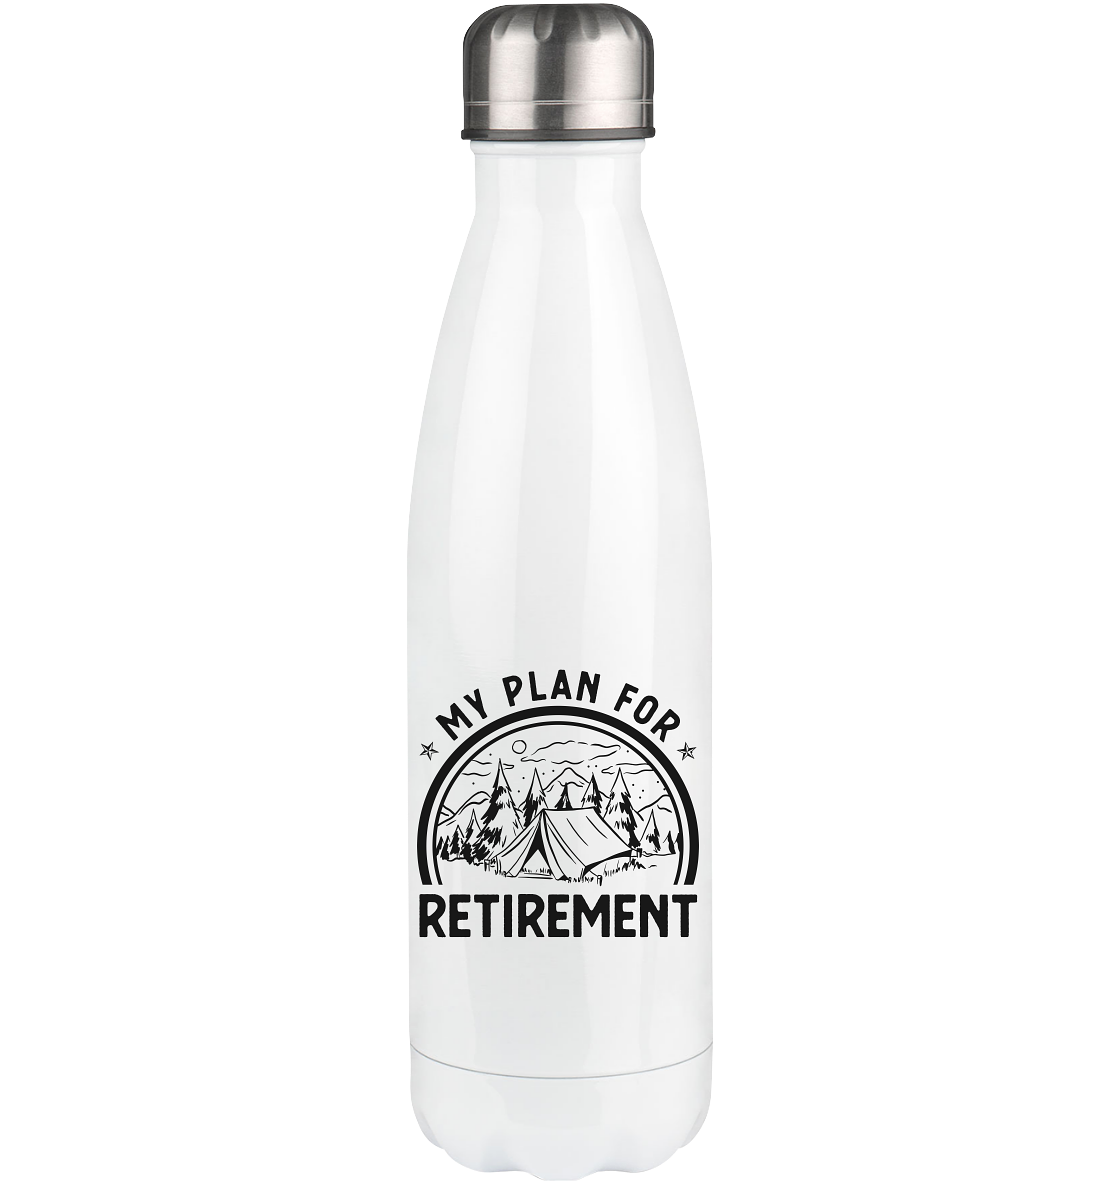 My Plan For Retirement 1 - Edelstahl Thermosflasche camping UONP 500ml